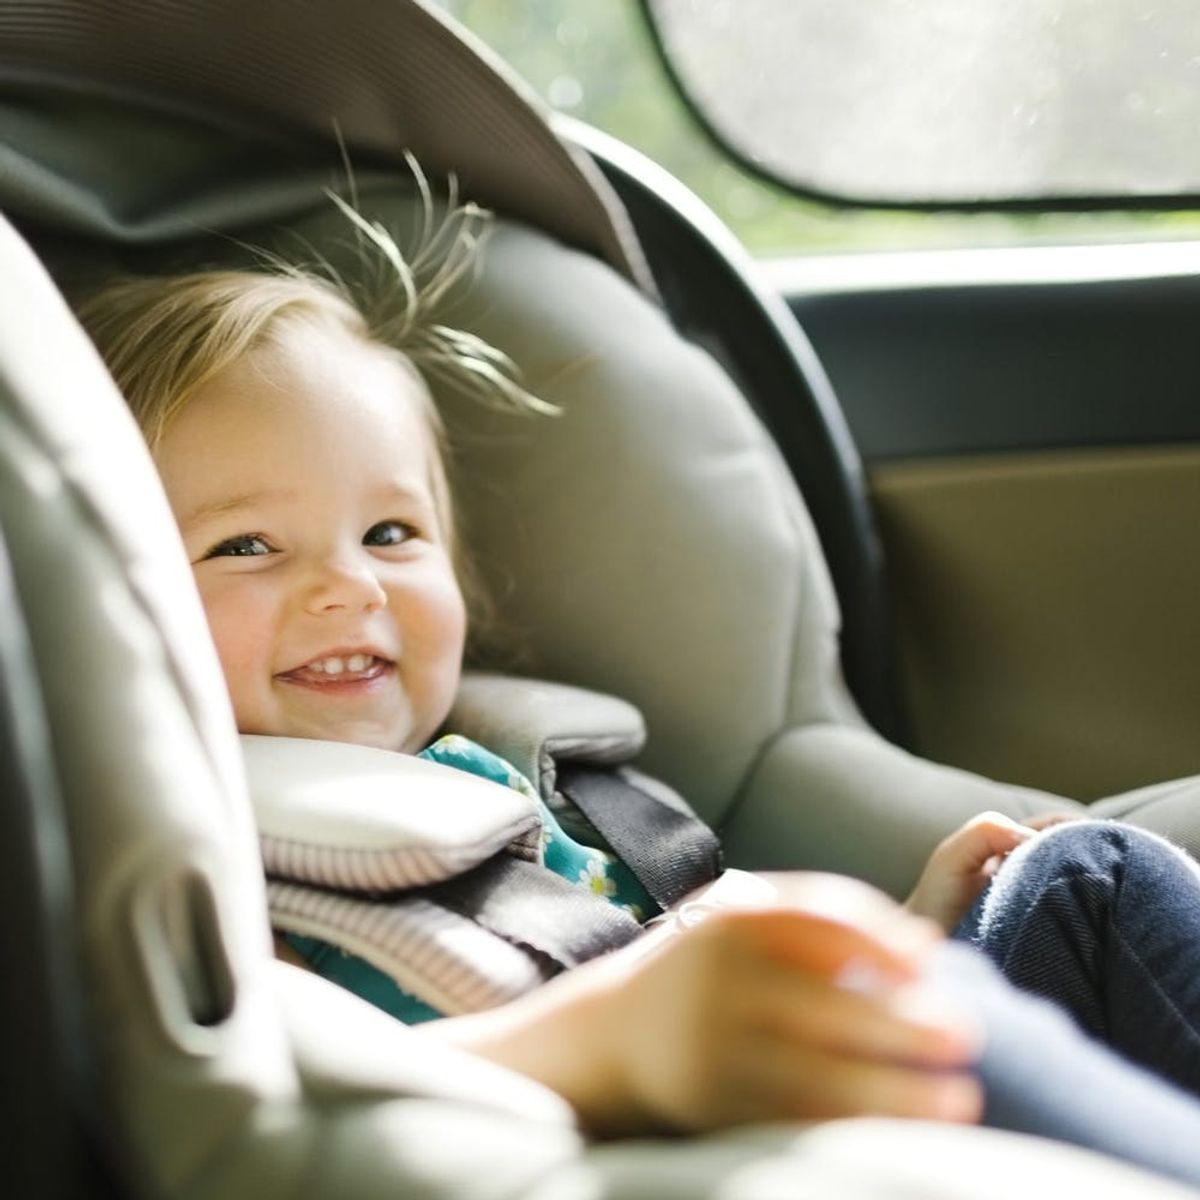 8 Products to Make the First Road Trip with a Baby Easier